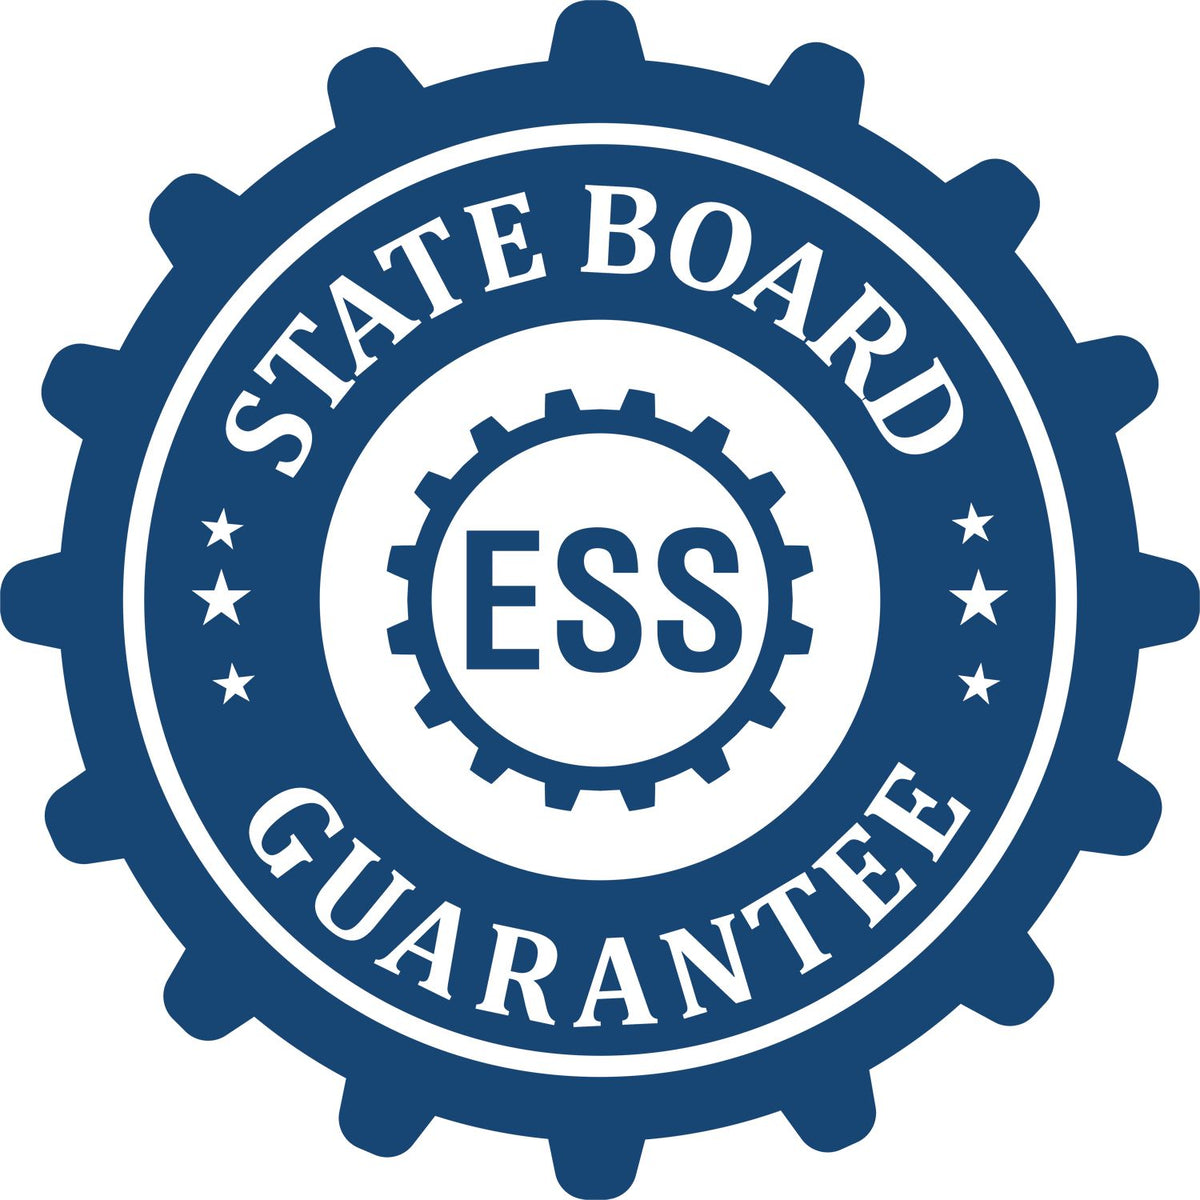 An emblem in a gear shape illustrating a state board guarantee for the Heavy-Duty New Jersey Rectangular Notary Stamp product.